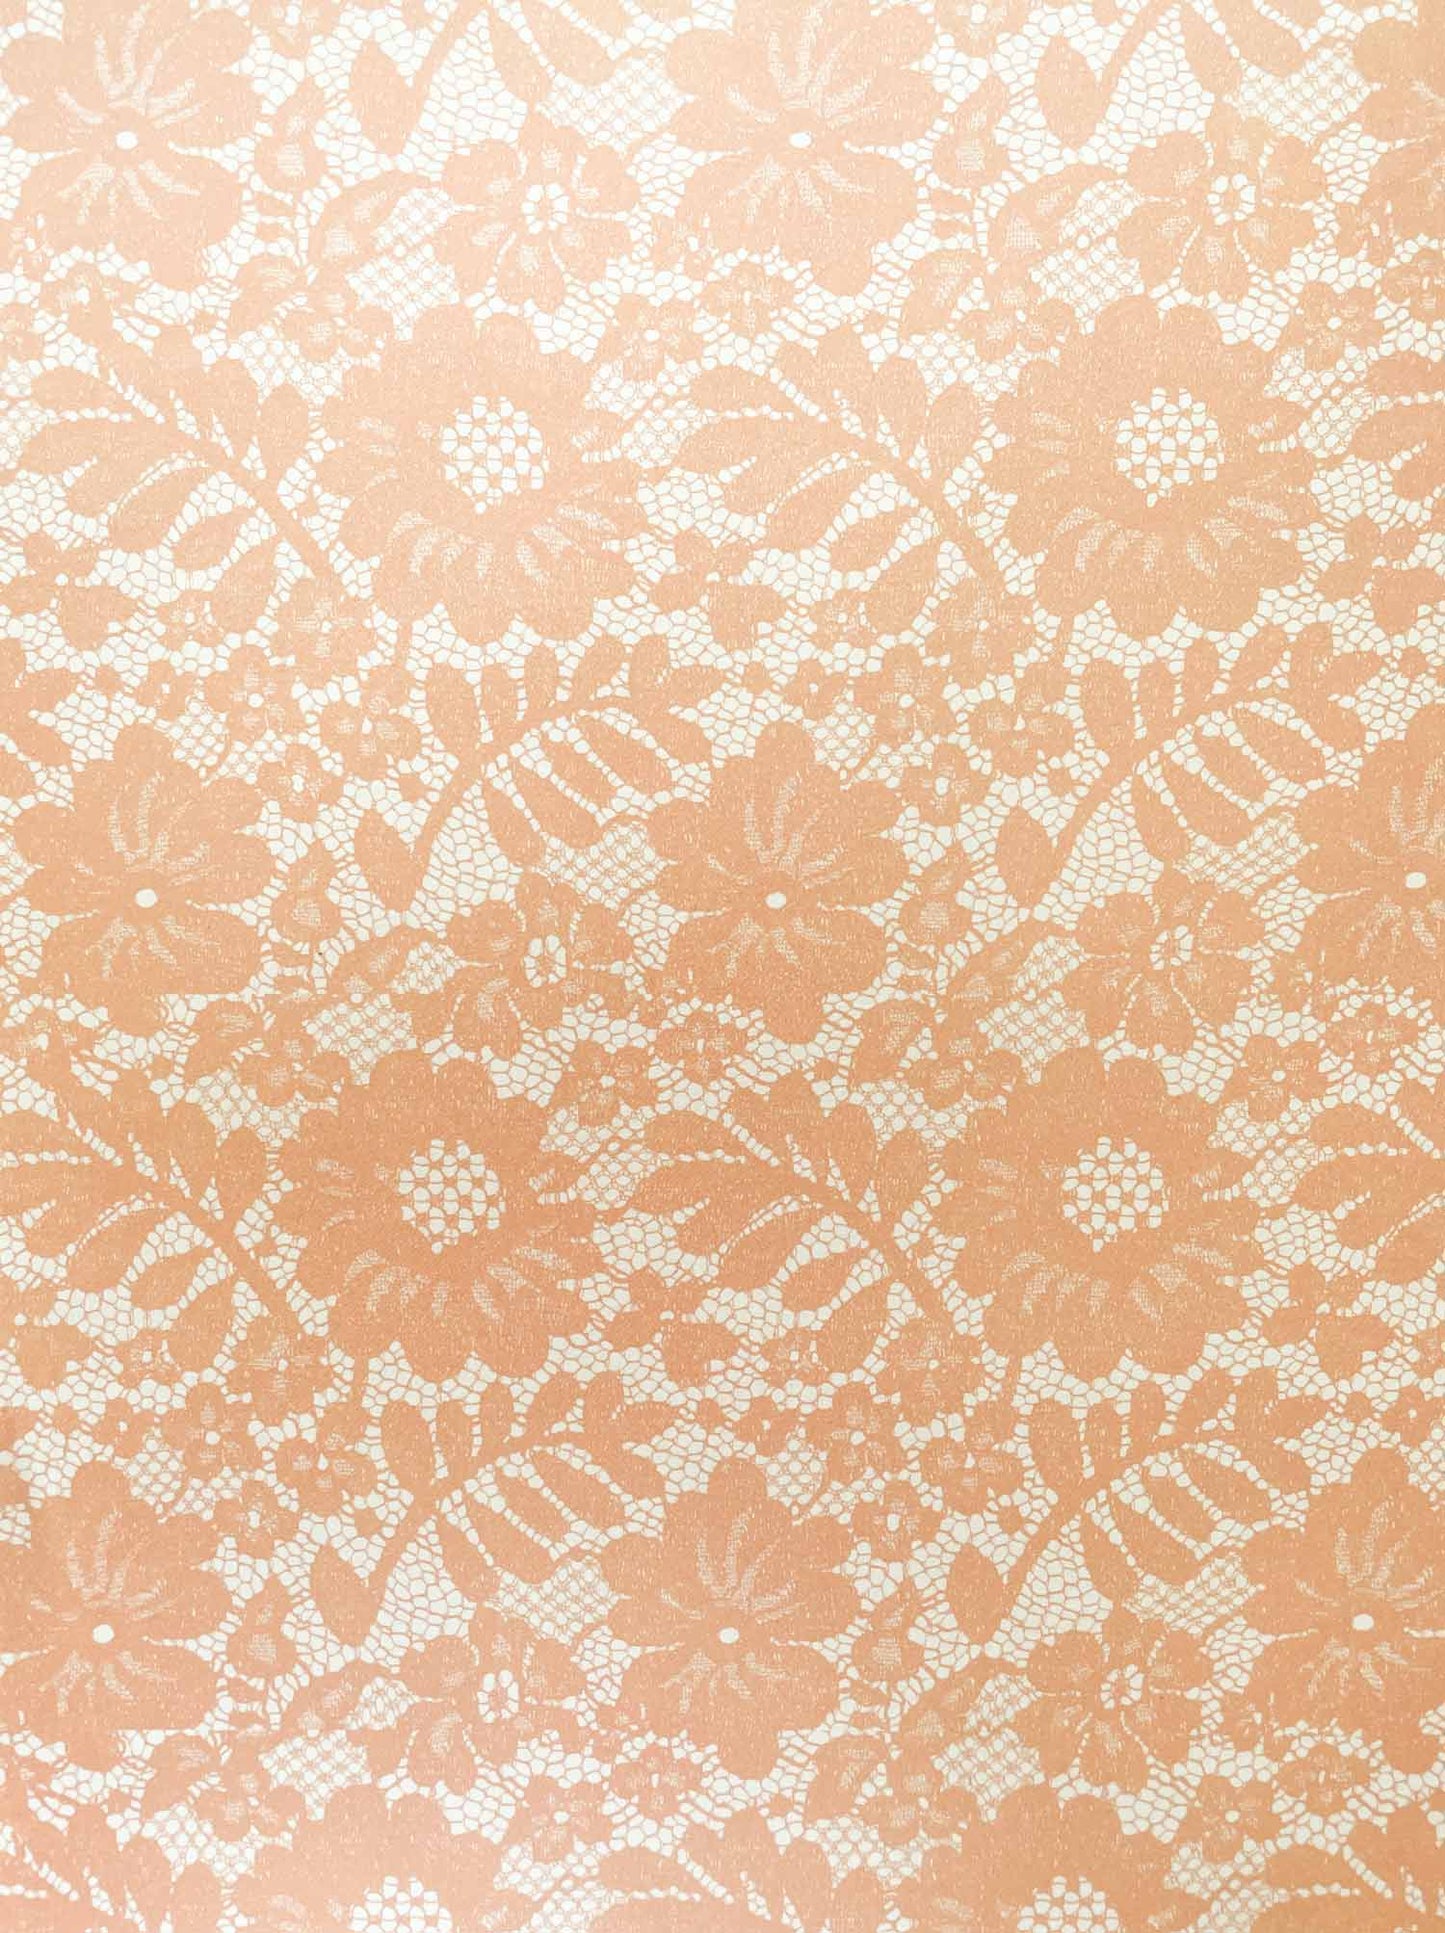 Chantilly Lace Paper in Blush  ImagineDIY   